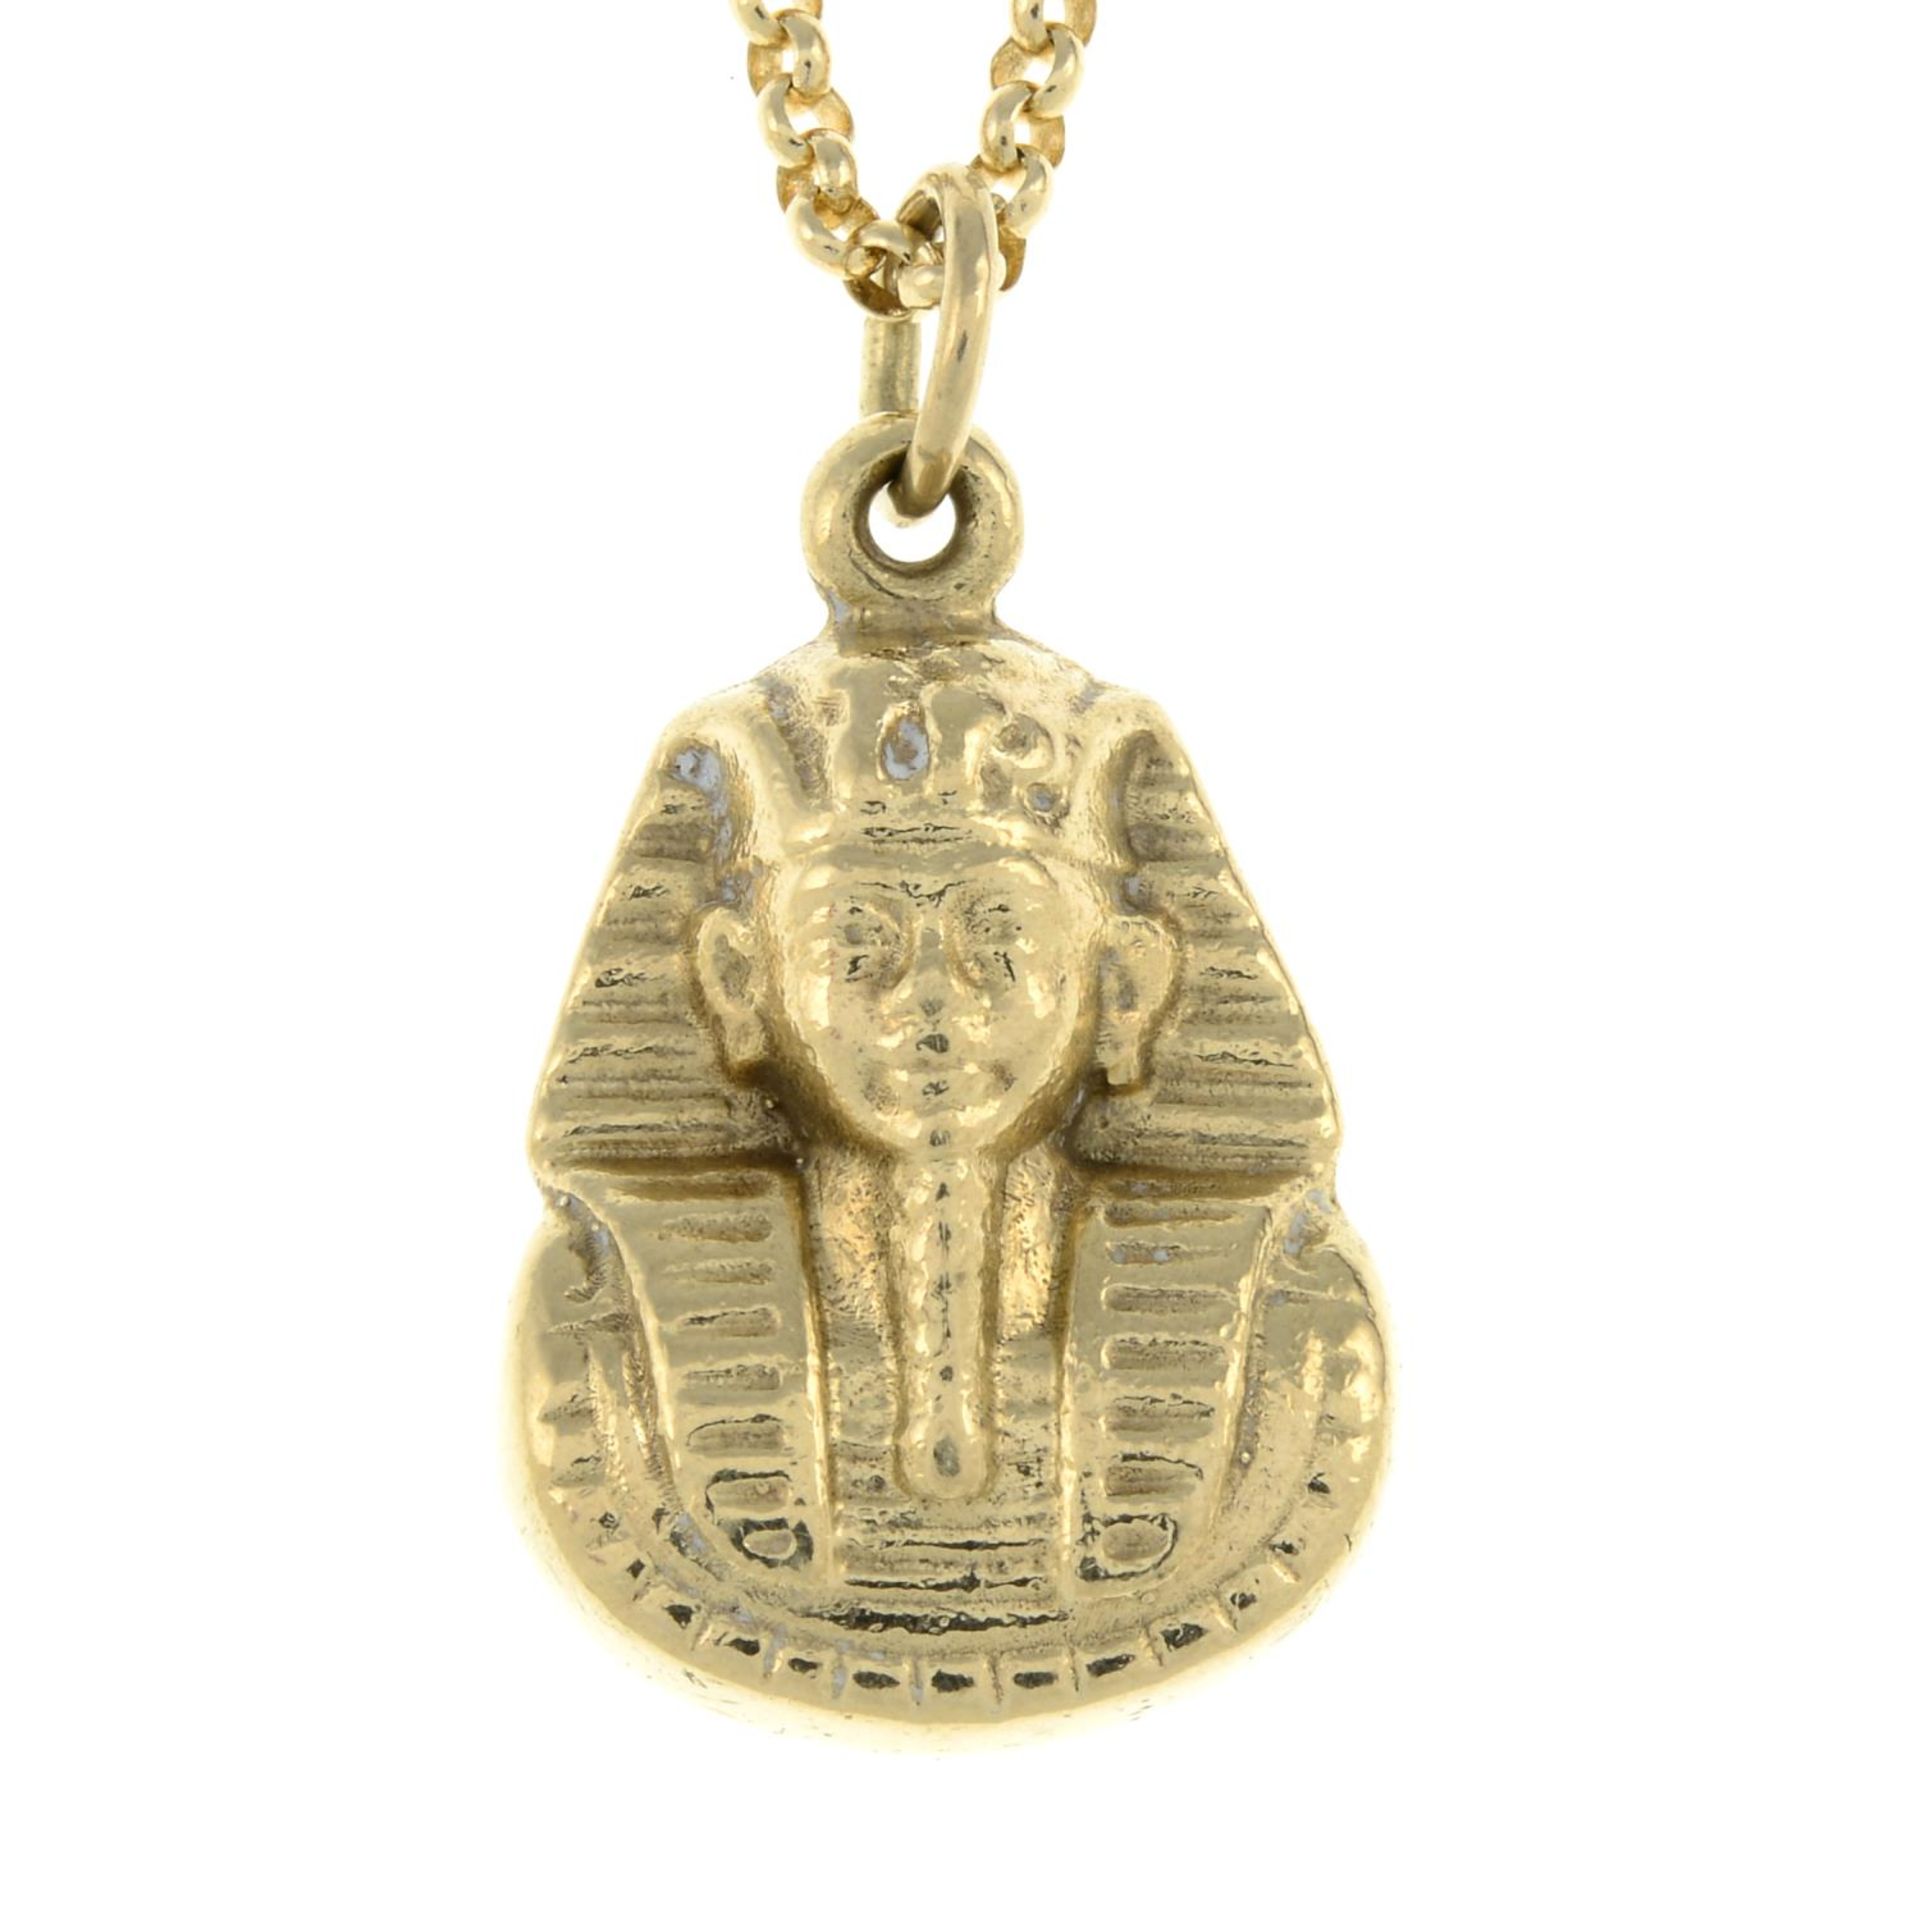 A pendant, designed to depict a Pharaoh's bust,